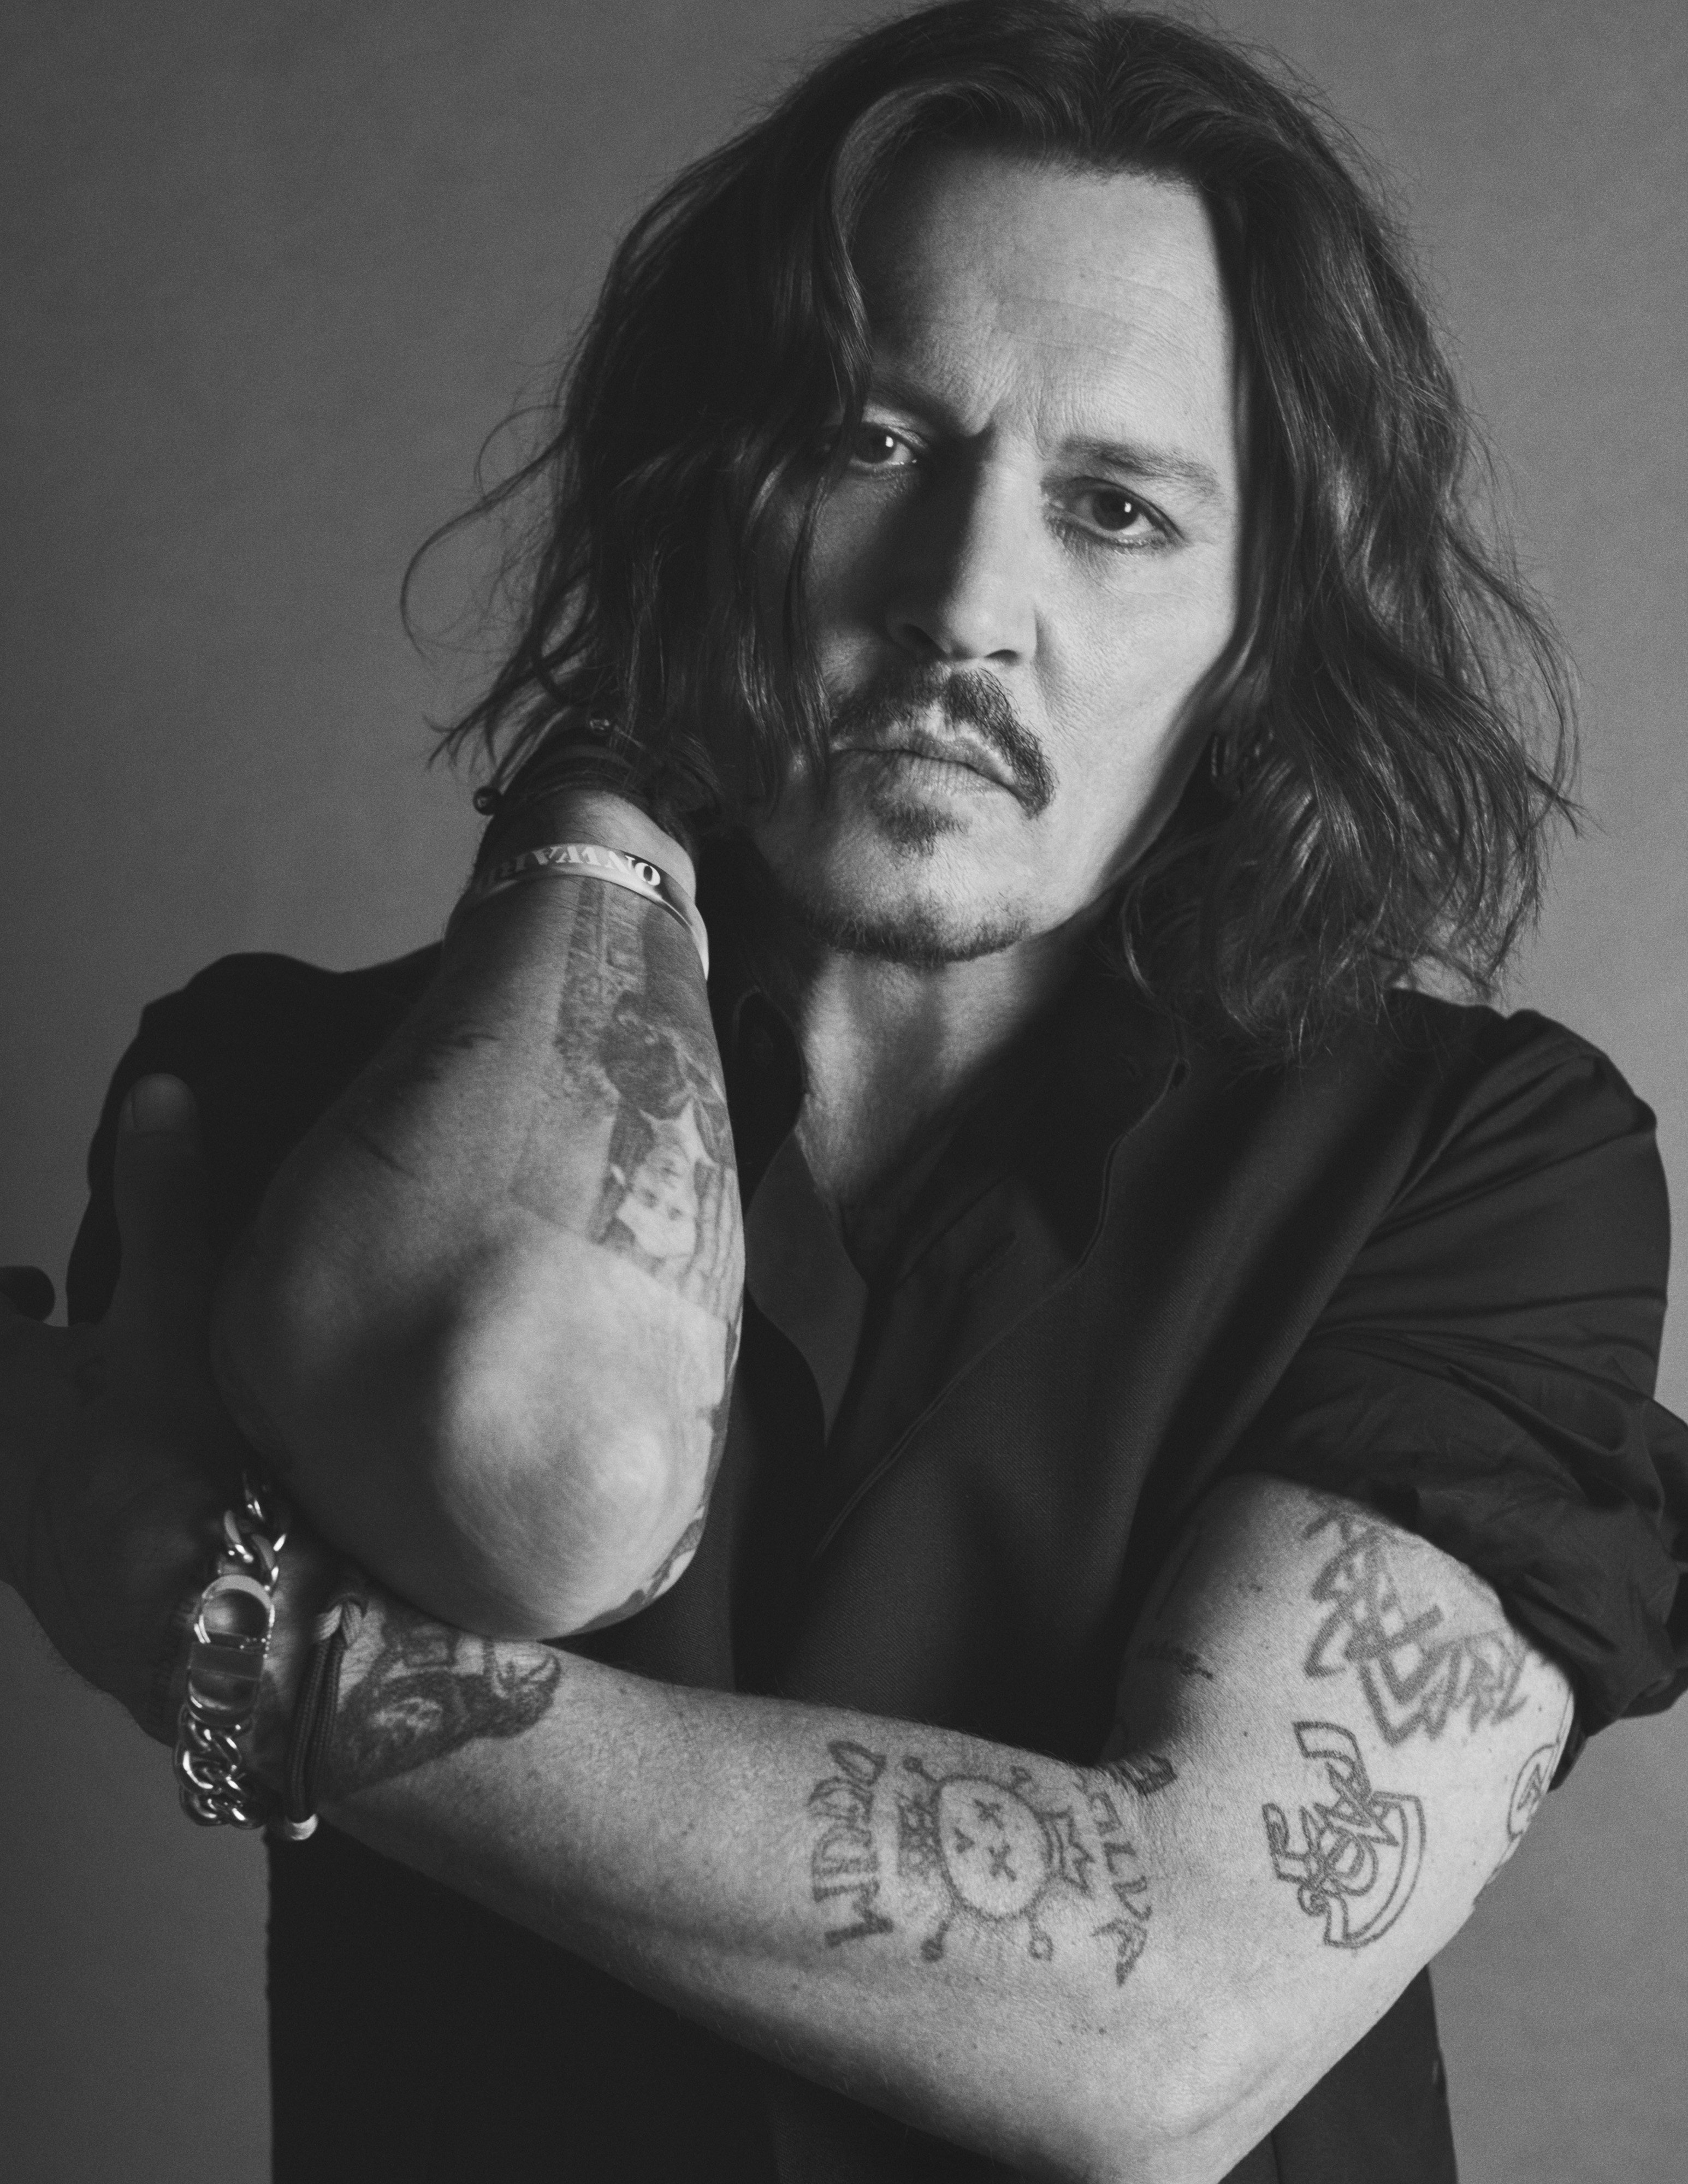 Johnny Depp for Dior Sauvage: the actor and musician talks about being the face of the world’s best-selling men’s perfume, and his passions for art, the blues and the Bahamas. Photo: Josh Olins